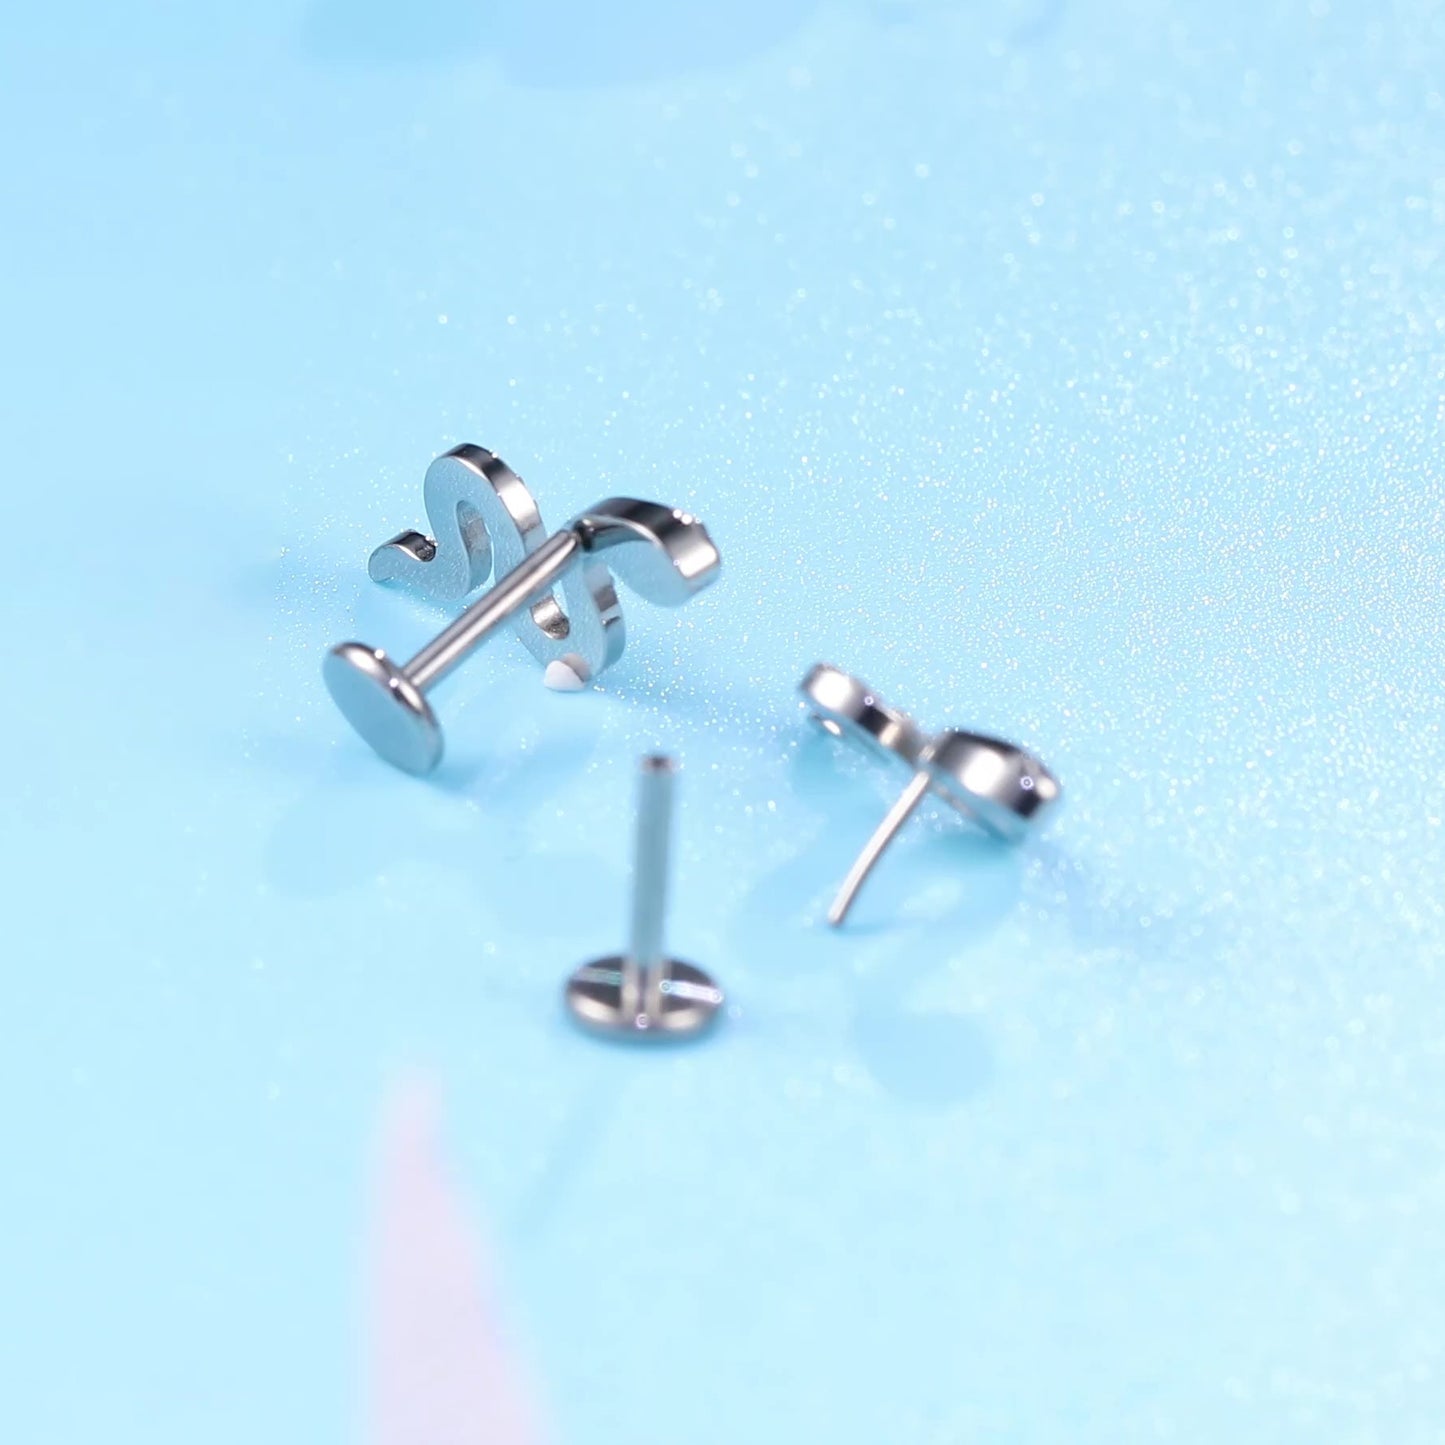 limerencia G23 Hypoallergenic 18g Flat Back Stud Earrings | F136 Implant Grade Titanium Press Fit Threadless Push Pop in Cartilage Helix Labret Lip Monroe Tragus Piercing Studs- Snake CZ